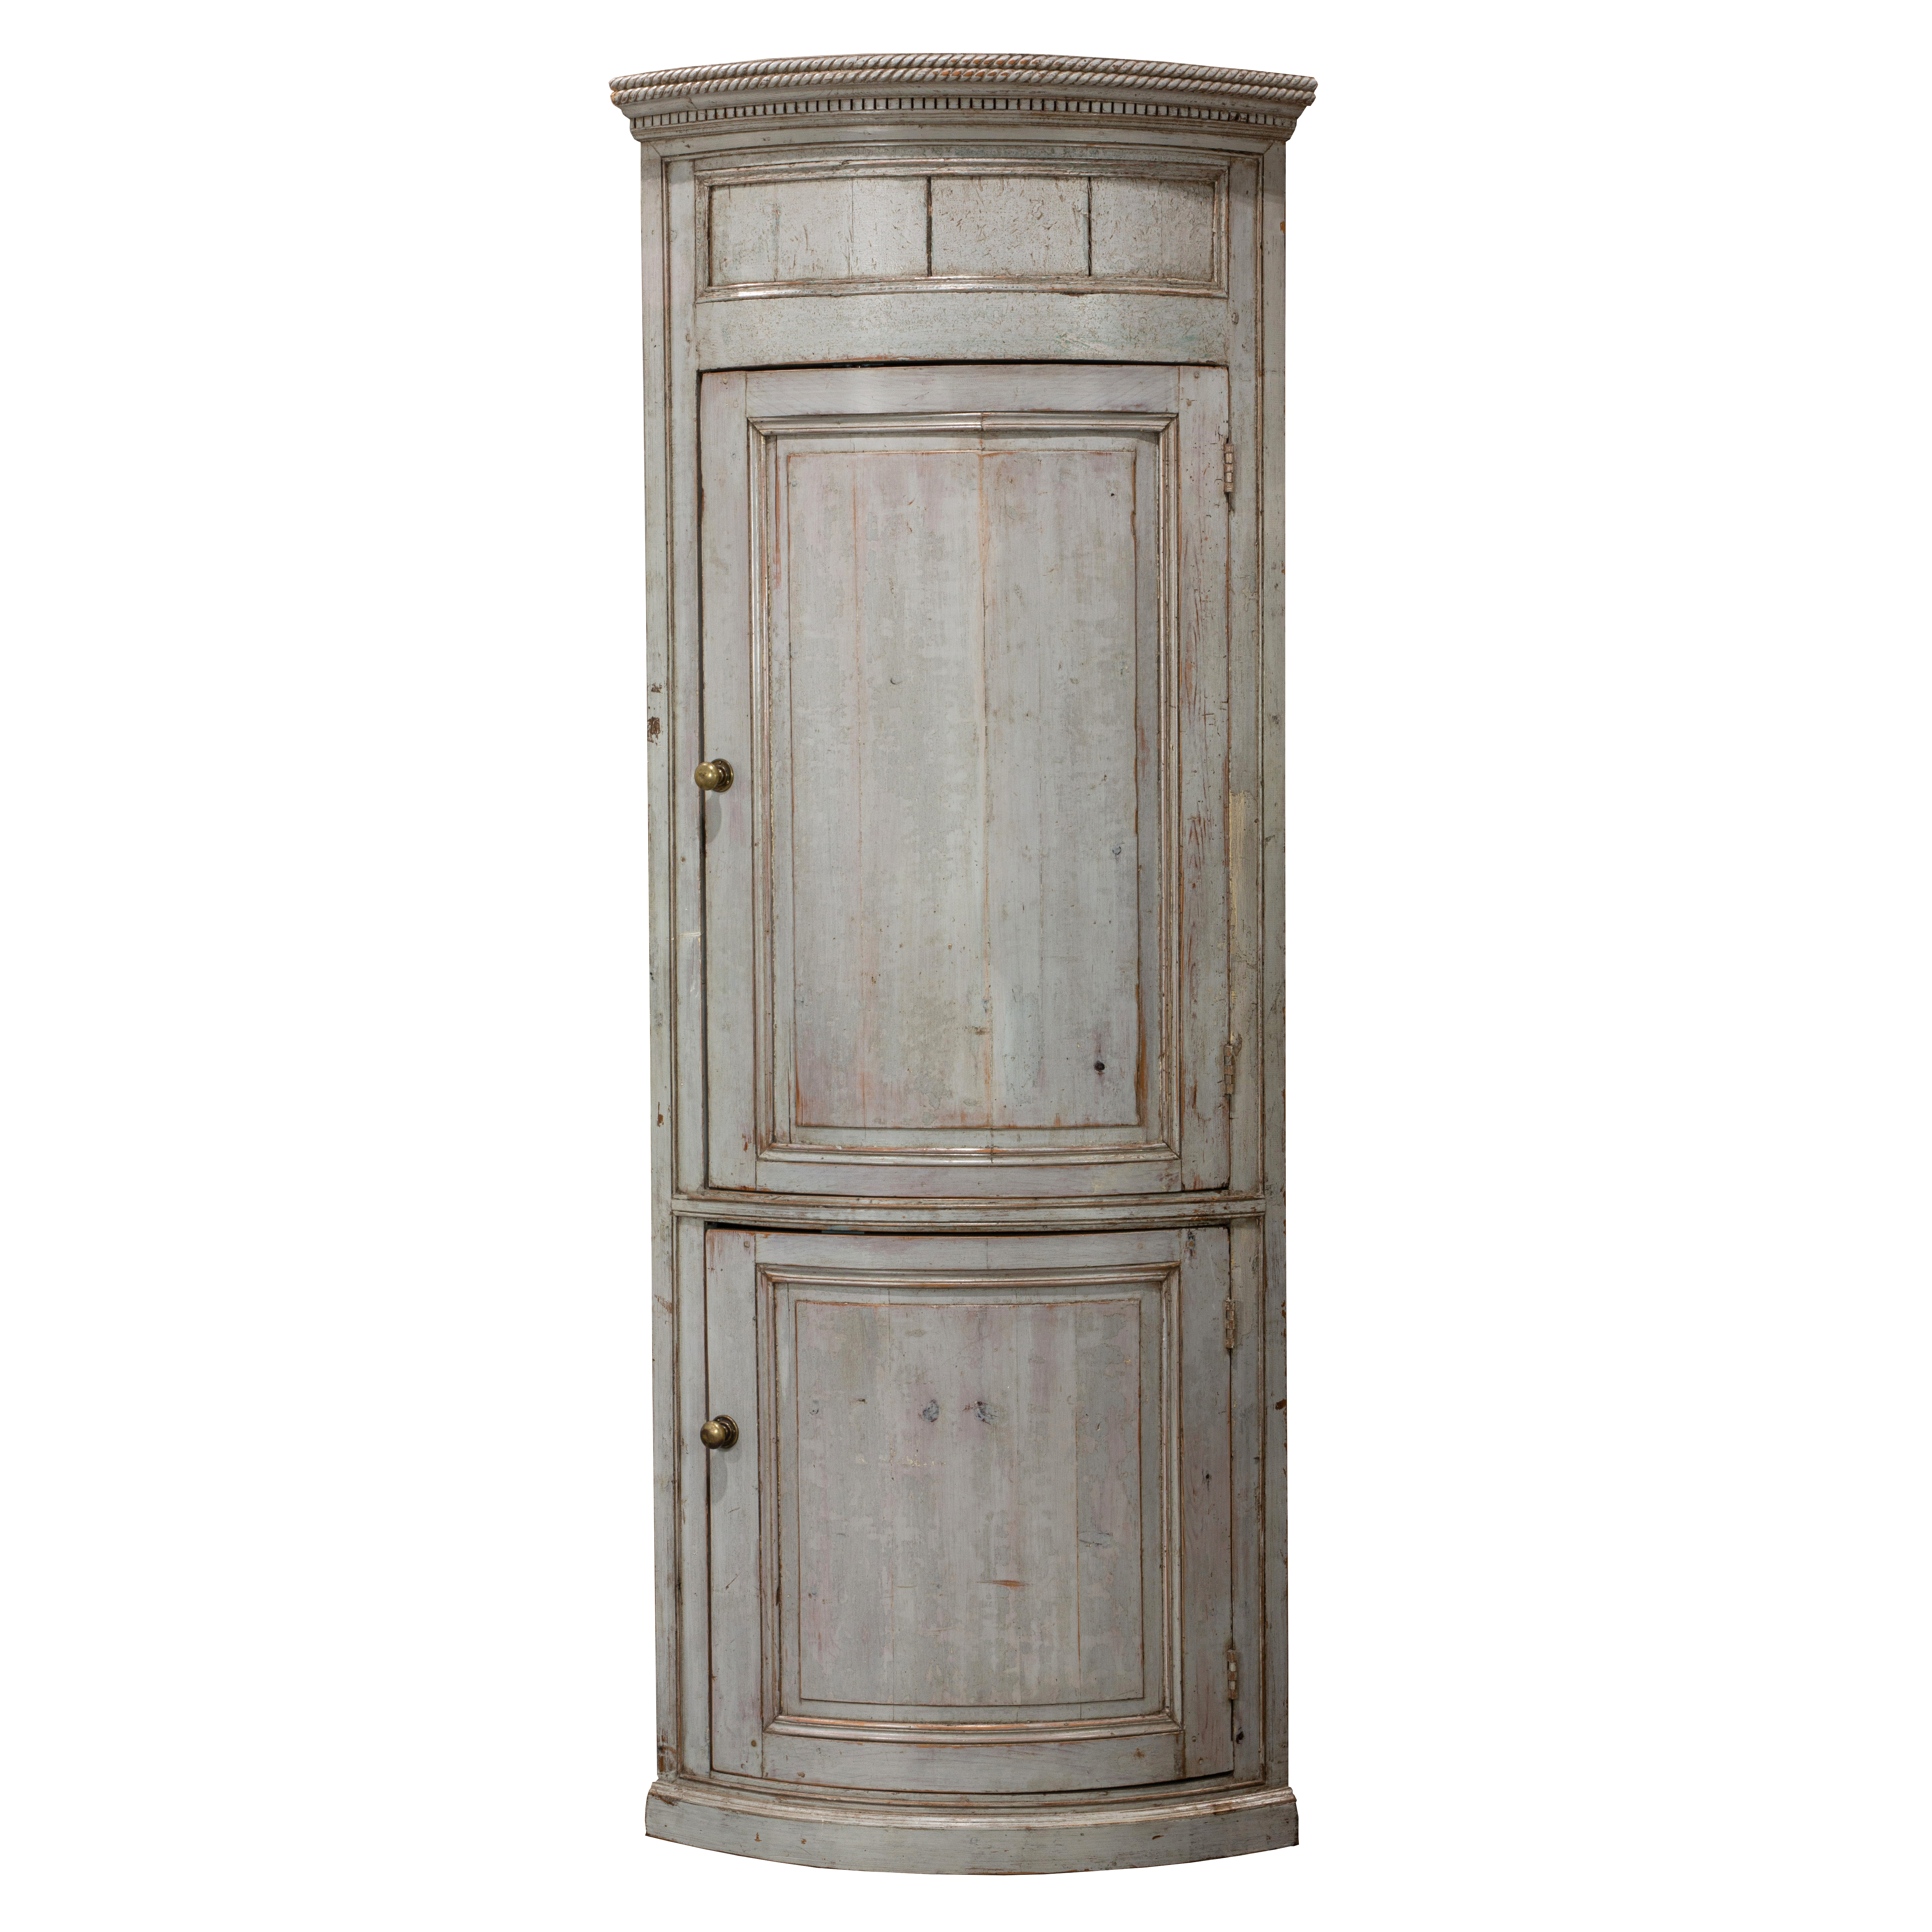 A FRENCH PROVINCIAL STYLE PAINTED 3b4173